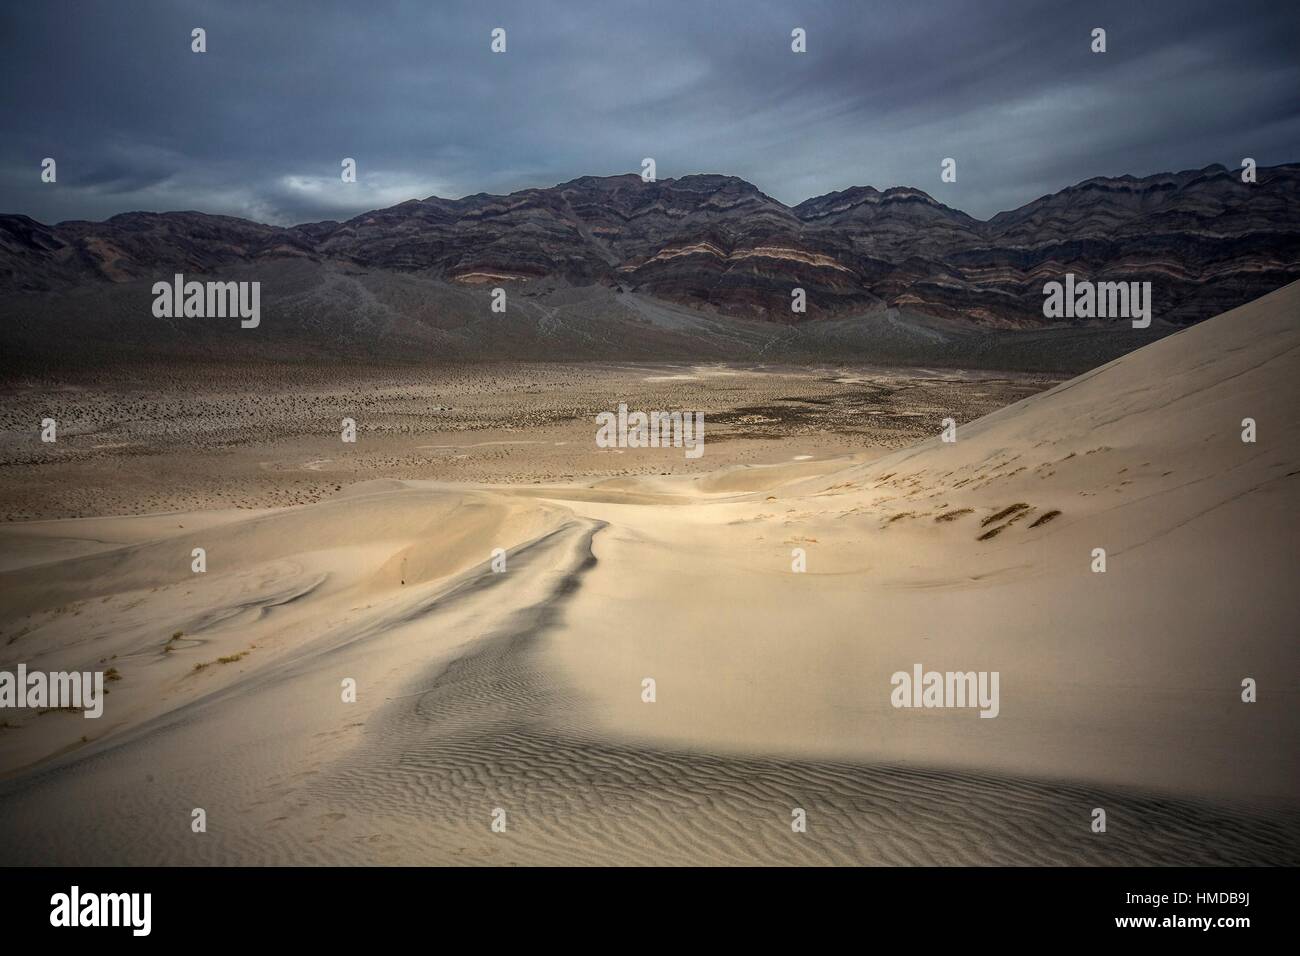 Shifting patterns and lines of sand at the Eureka Dunes at Death Valley National Park, California. Stock Photo